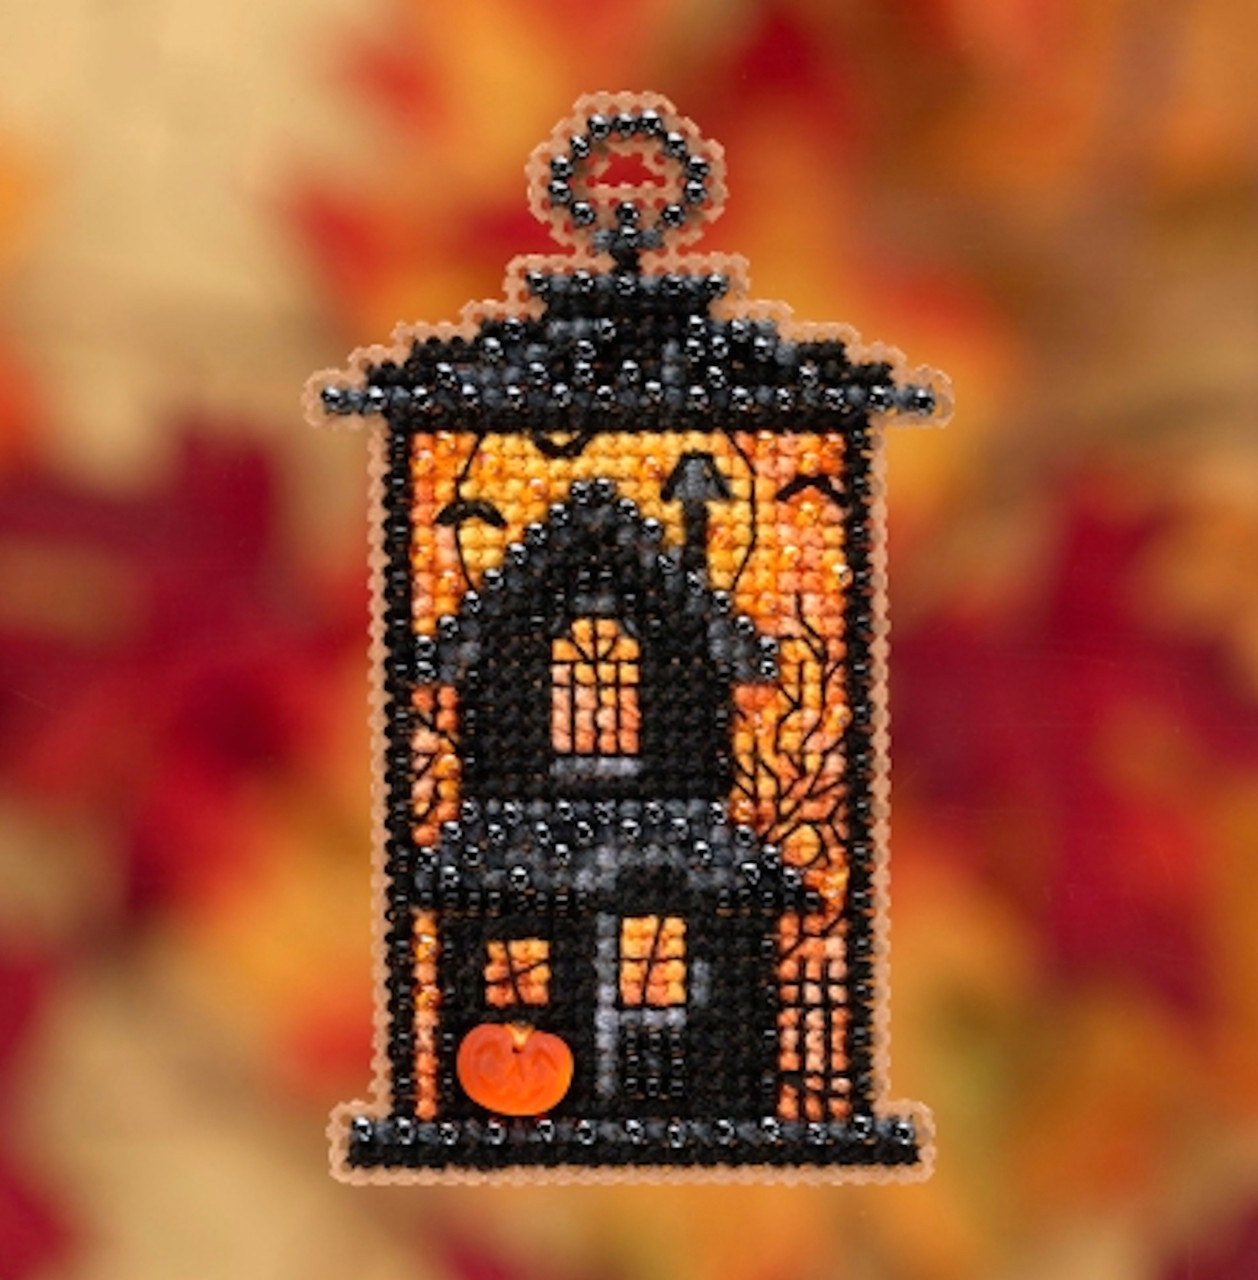 Mill Hill 2019 Autumn Harvest Collection - Moonstruck Manor Ornament